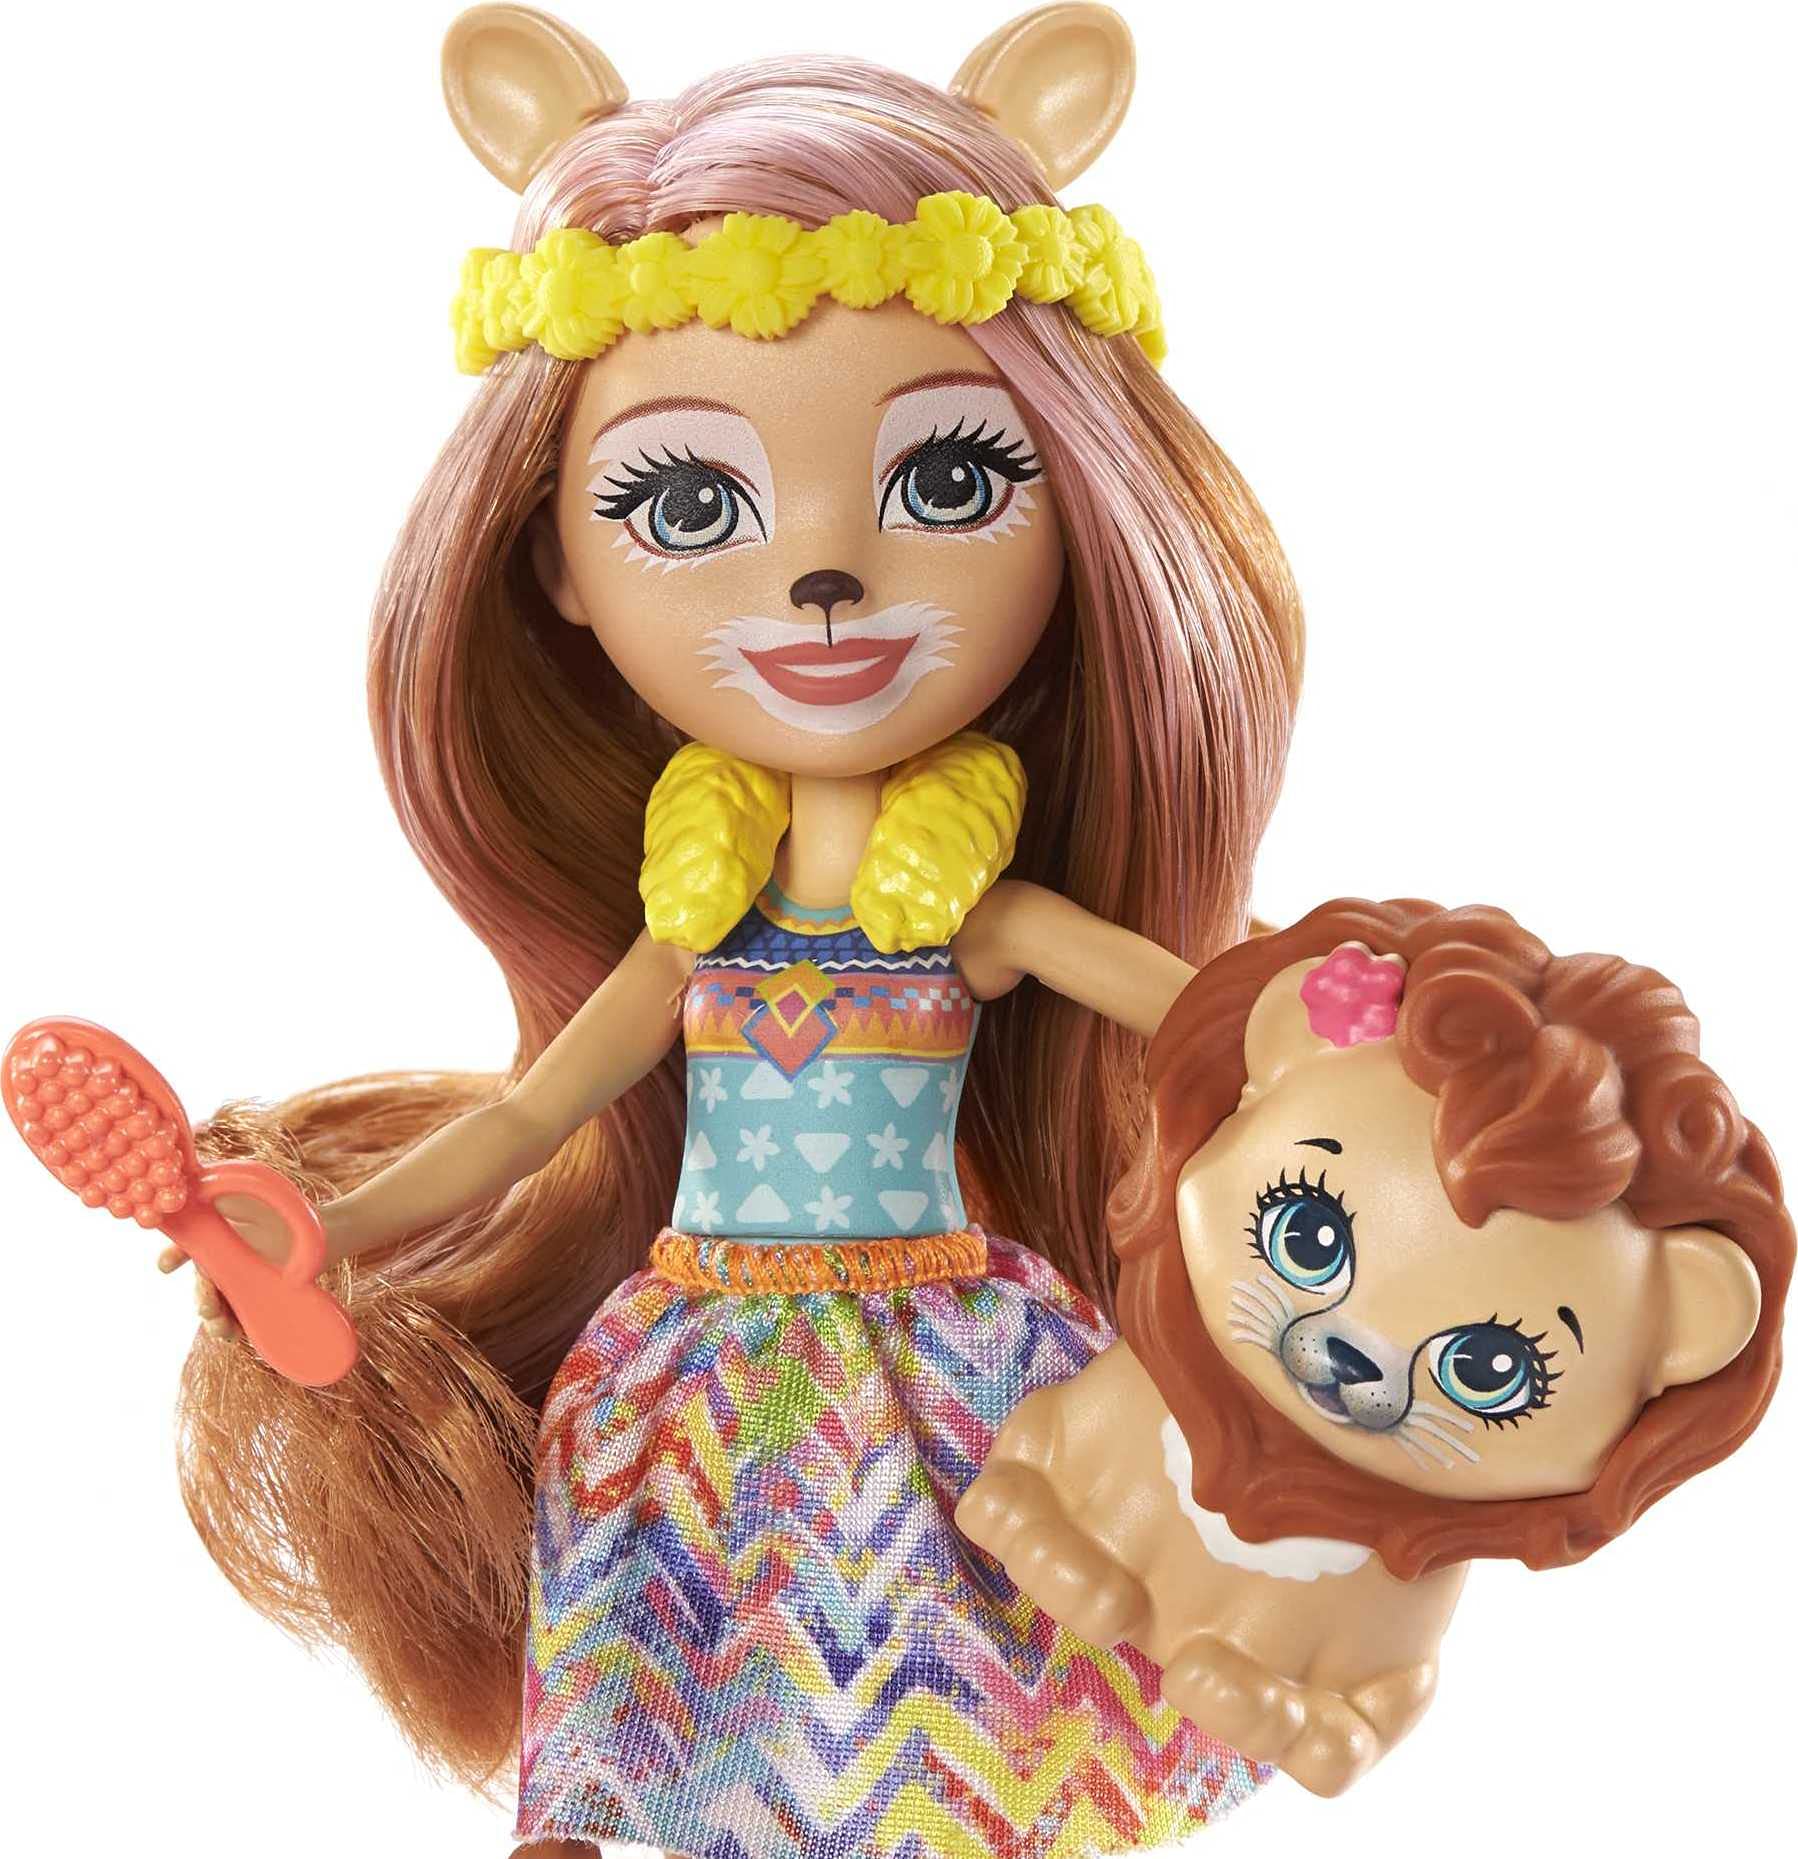 Enchantimals Stylin’ Salon Playset Lacey Lion (6-in) & Manesy with 13 Accessories, Sunny Savanna Collection, Just Add Water for Color-Change Hairstyle Fun, Great Gift for 3 to 8 Year Old Kids